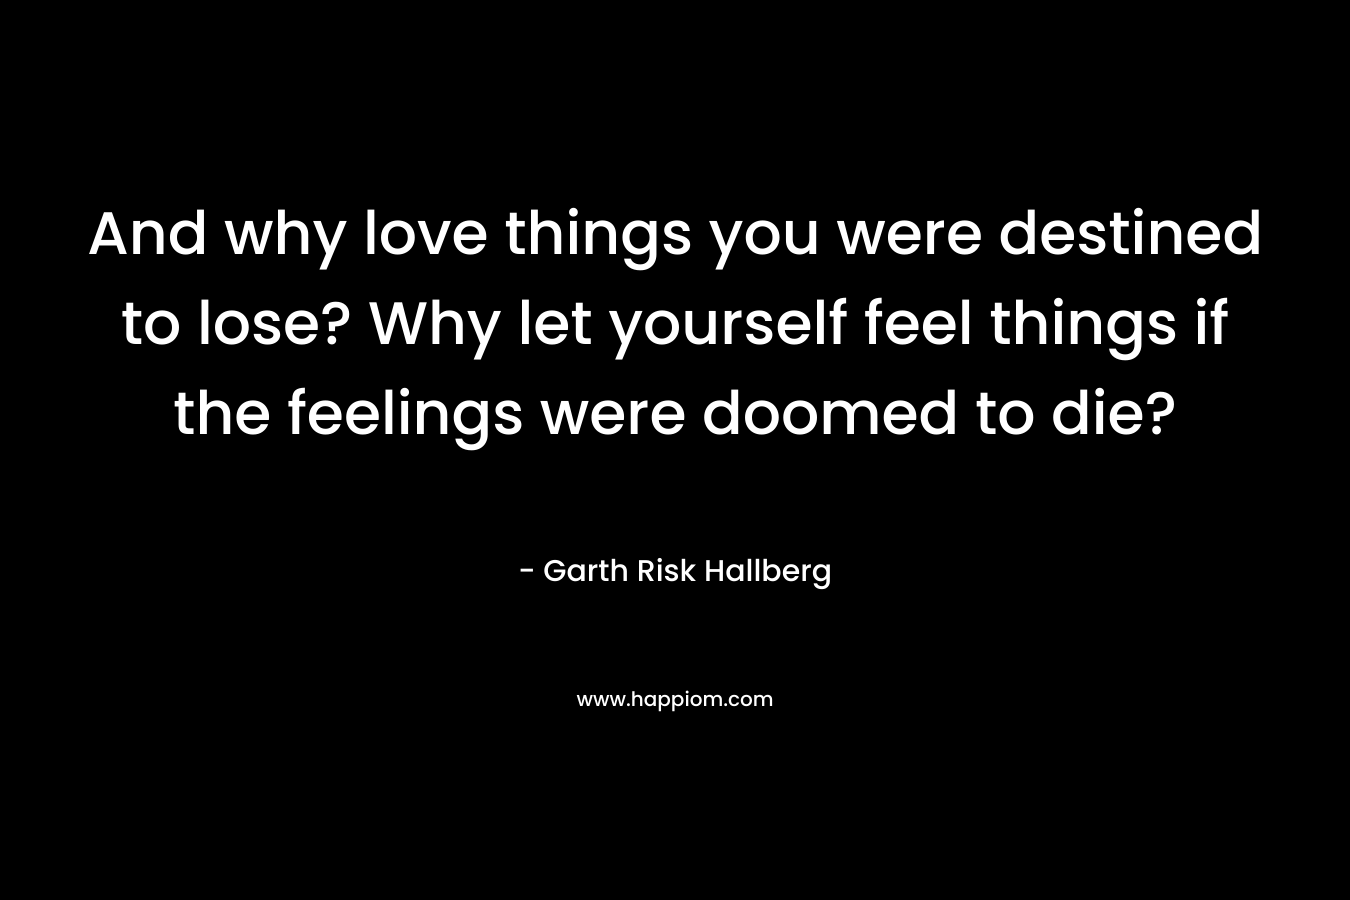 And why love things you were destined to lose? Why let yourself feel things if the feelings were doomed to die? – Garth Risk Hallberg